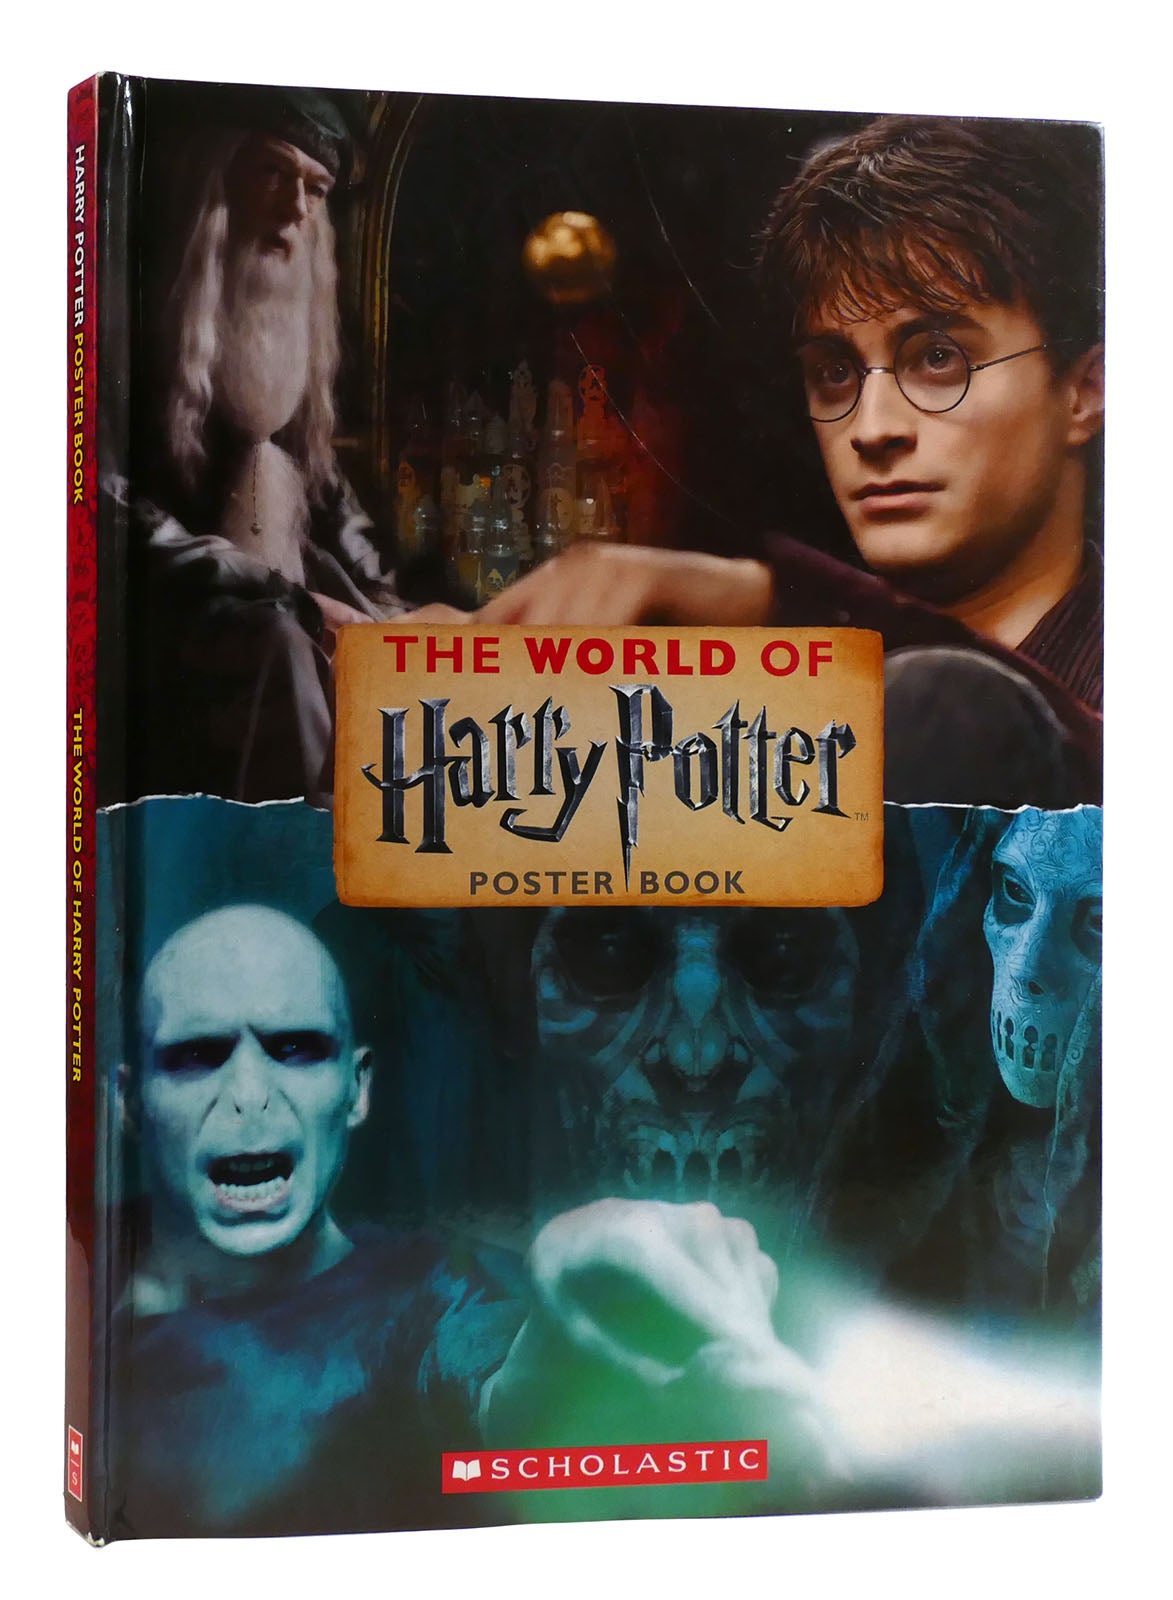 THE WORLD OF HARRY POTTER: POSTER BOOK, J. K. Rowling